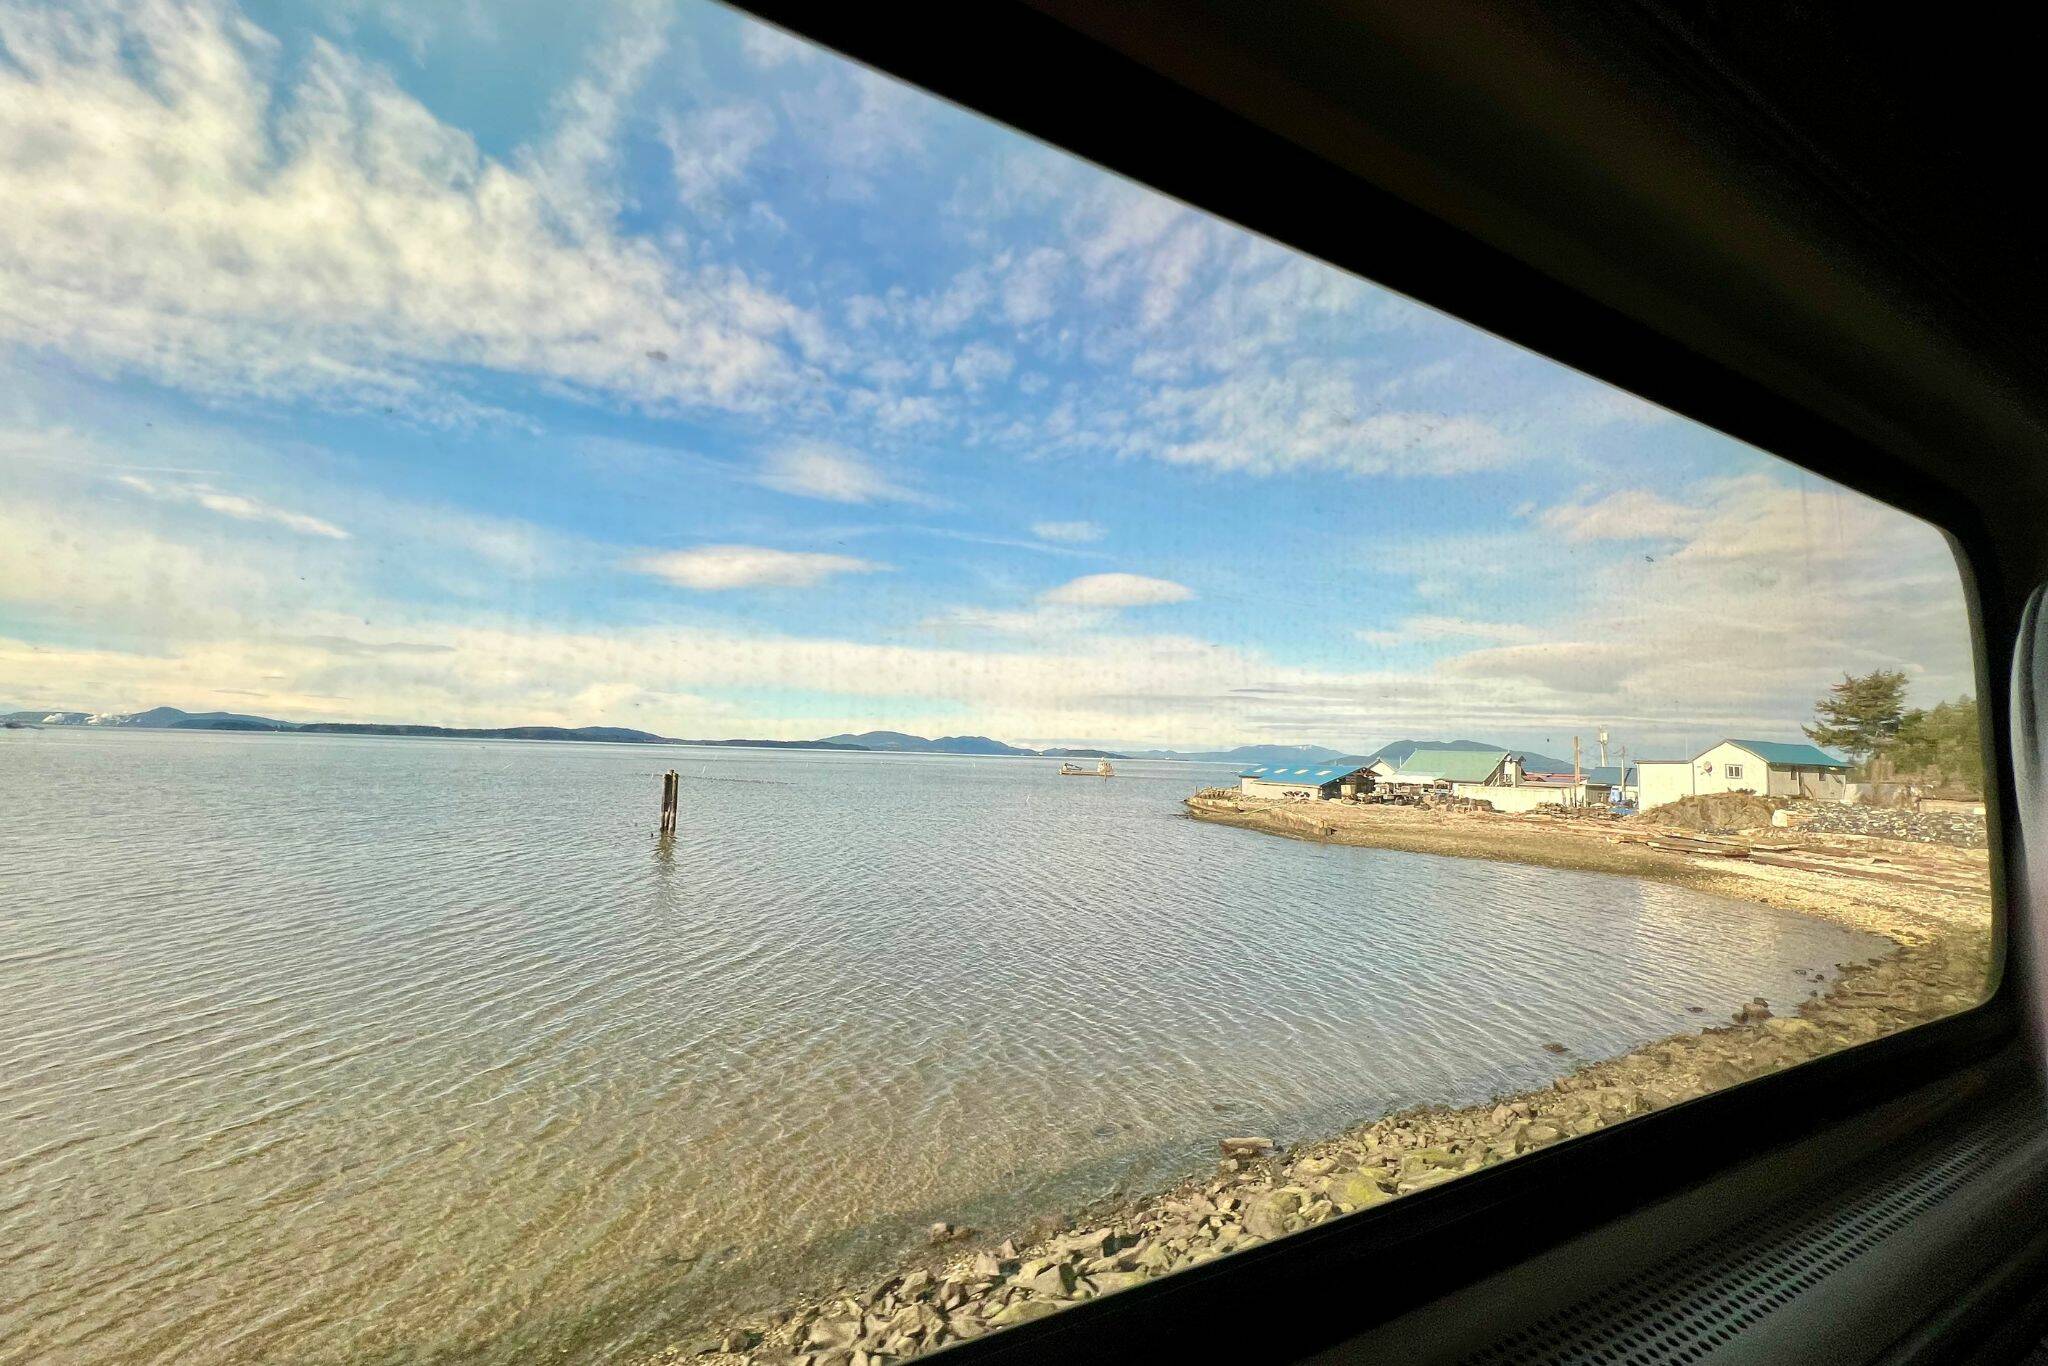 View of Samish Bay near Taylor Shellfish Farms from the Amtrak window. (Andrea Brown / The Herald)